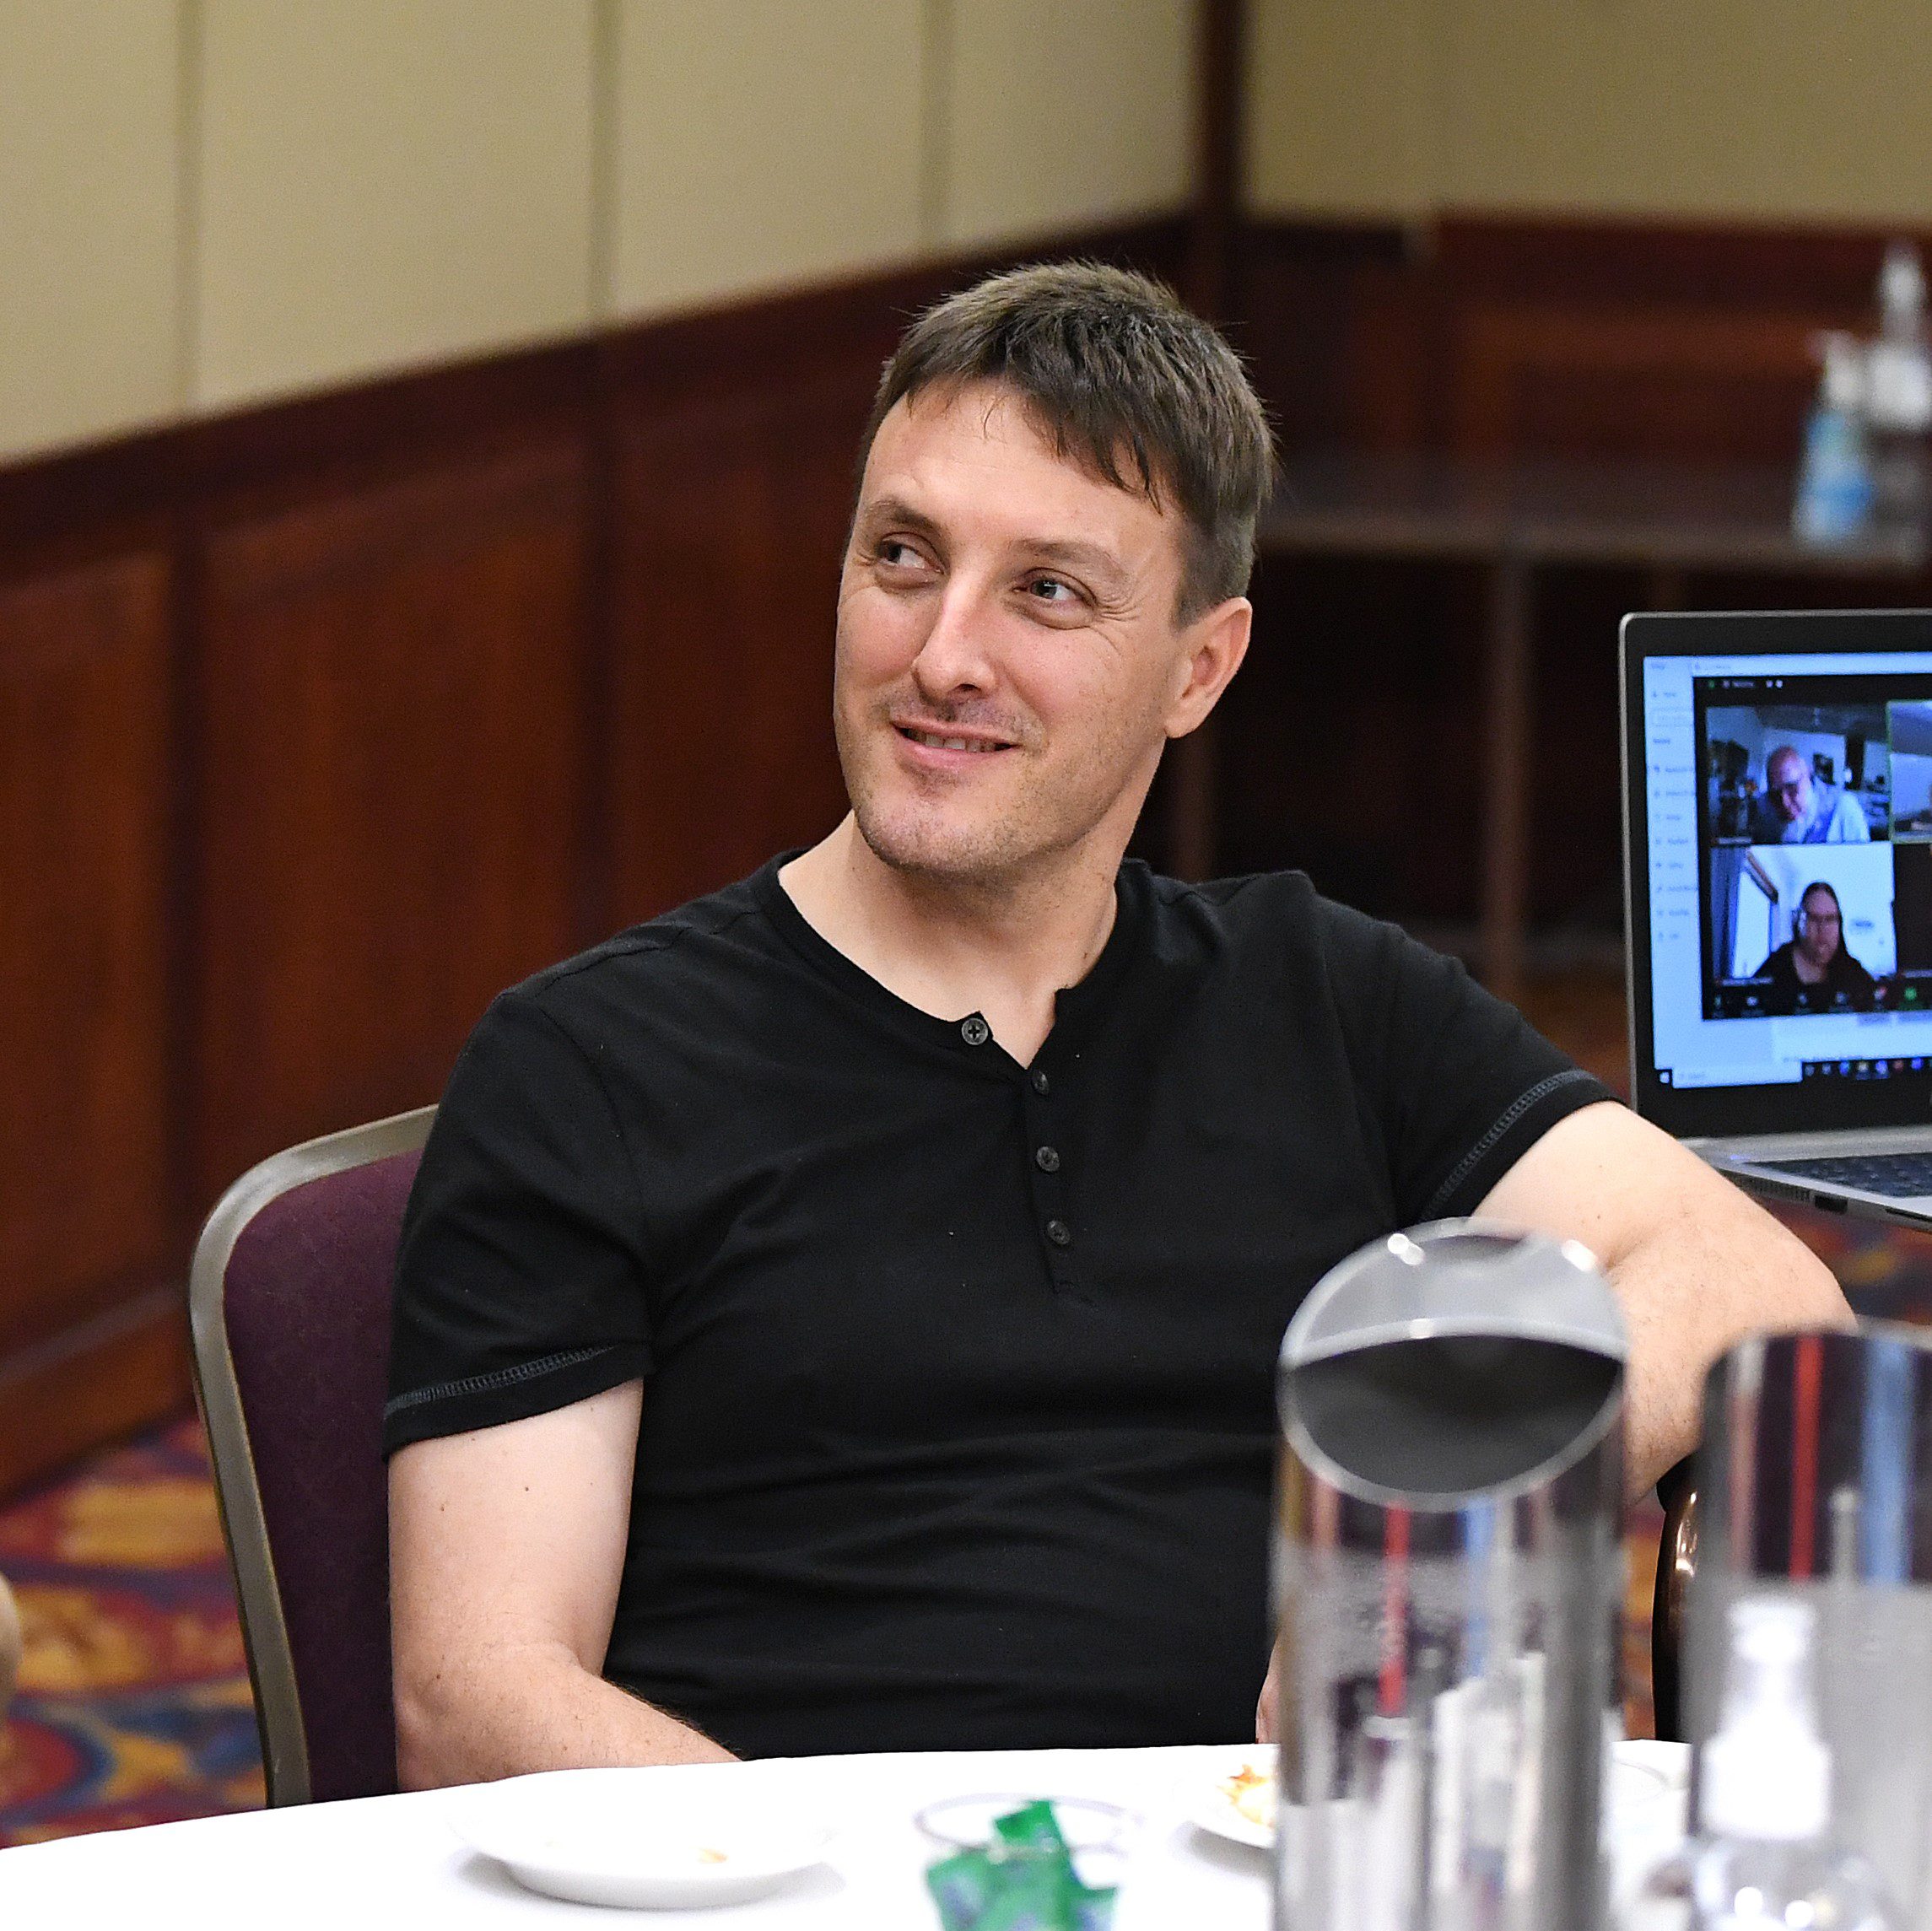 A man wearing a black shirt sitting at a table smiling at someone outside of the photo frame.